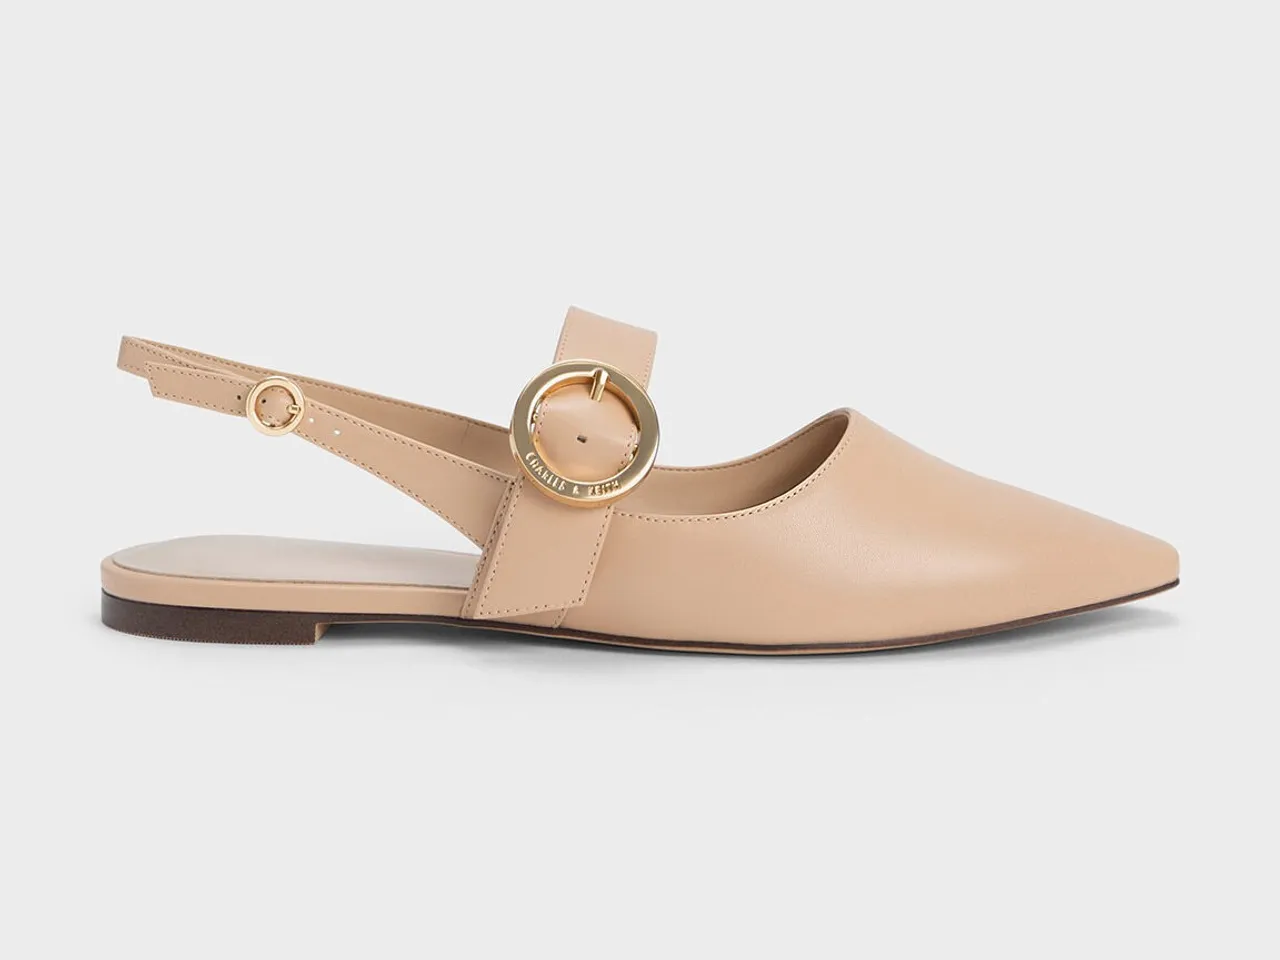 Giày bệt Charles & Keith Buckled Strap Slingback Flats CK1-70380974 Nude, 35